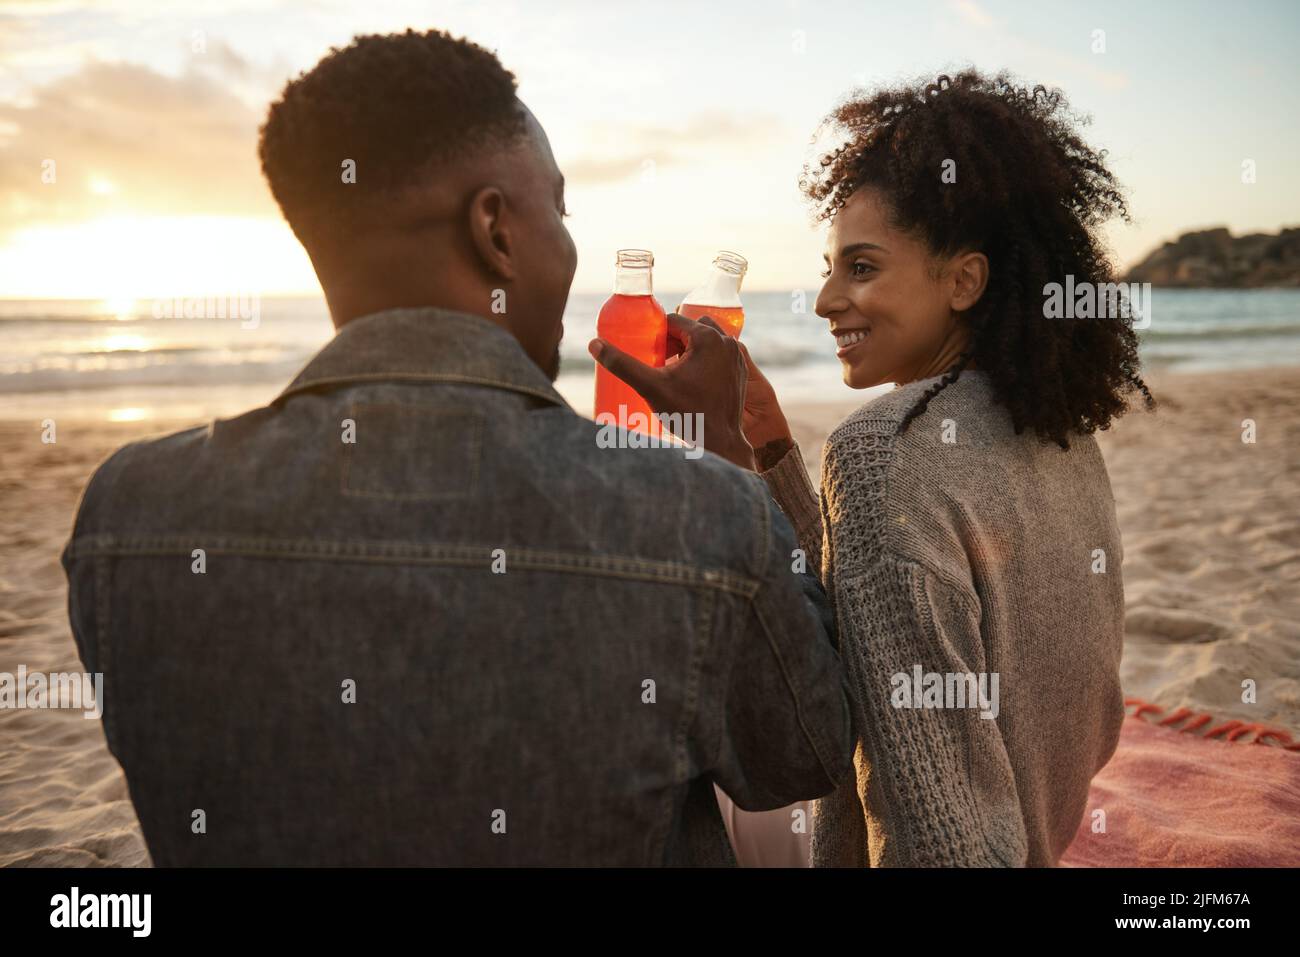 Smiling young multiethnic couple drinking juice on a sandy beach at sunset Stock Photo